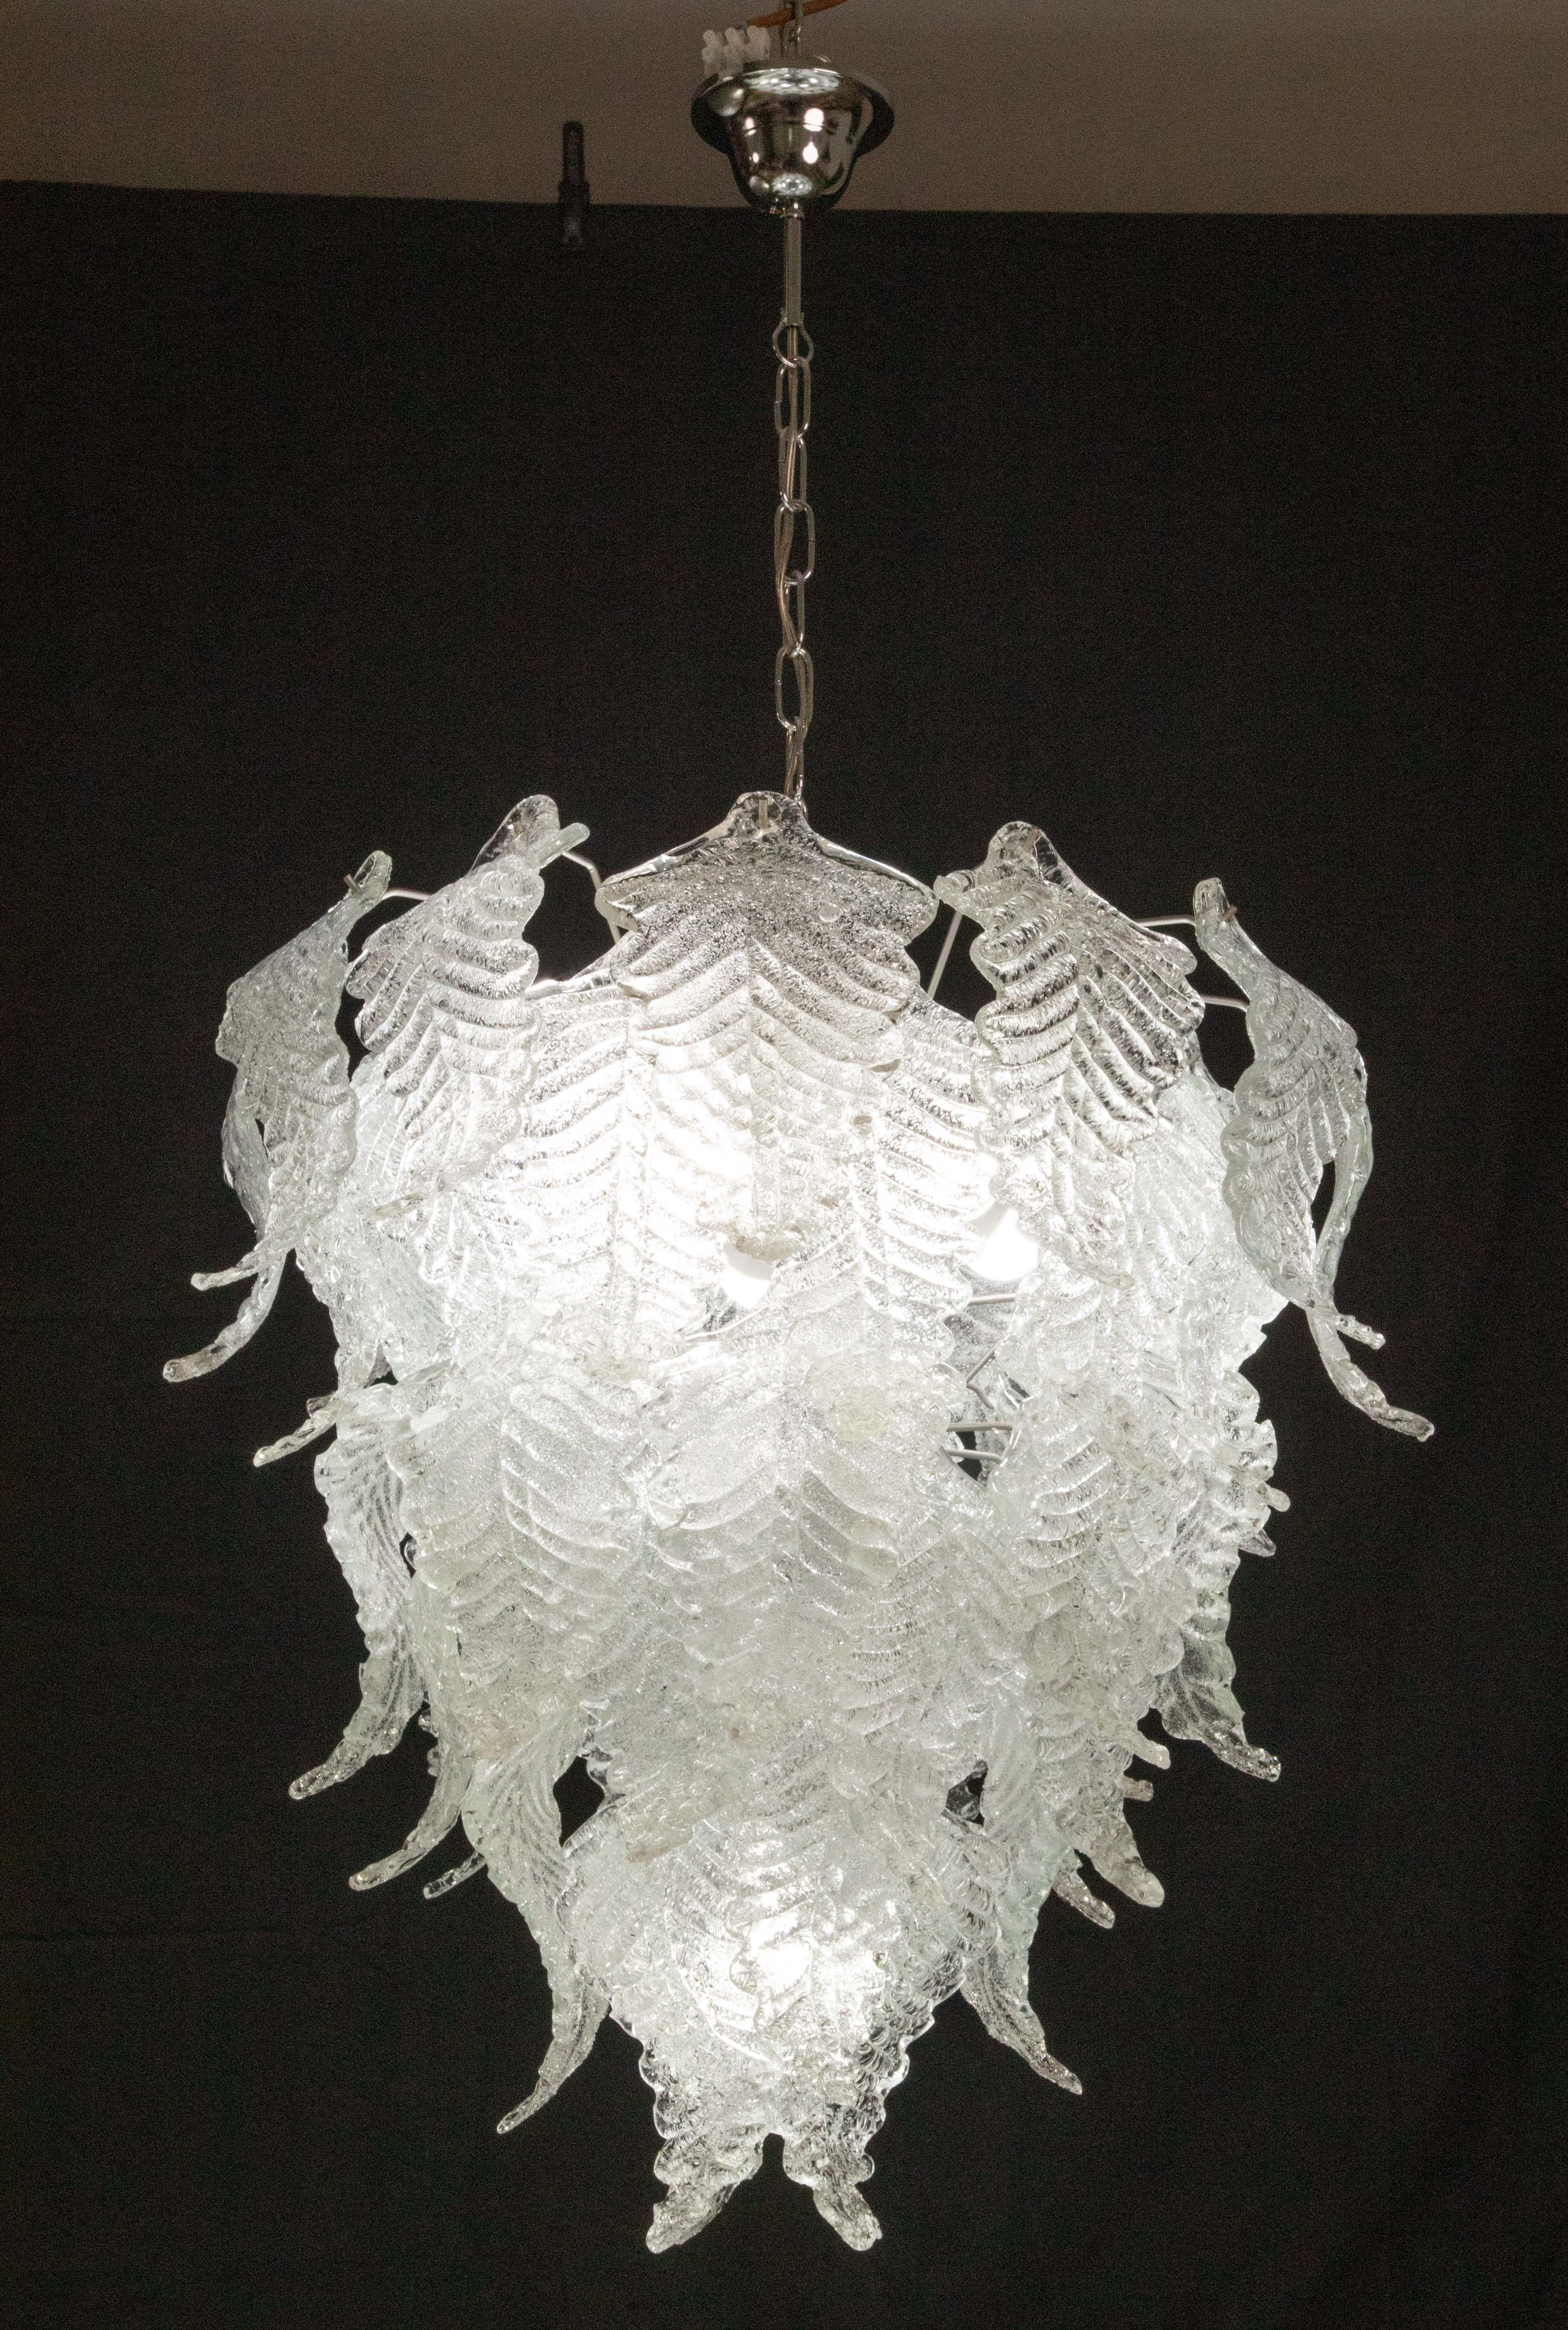 Murano glass chandelier suitable for decorating a large space.
The chandelier is made up of two rounds of glass which are articulated on 3 levels for a total of 48 glasses.
The luminaire measures 120 cm with the chain, 80 cm without the chain, on